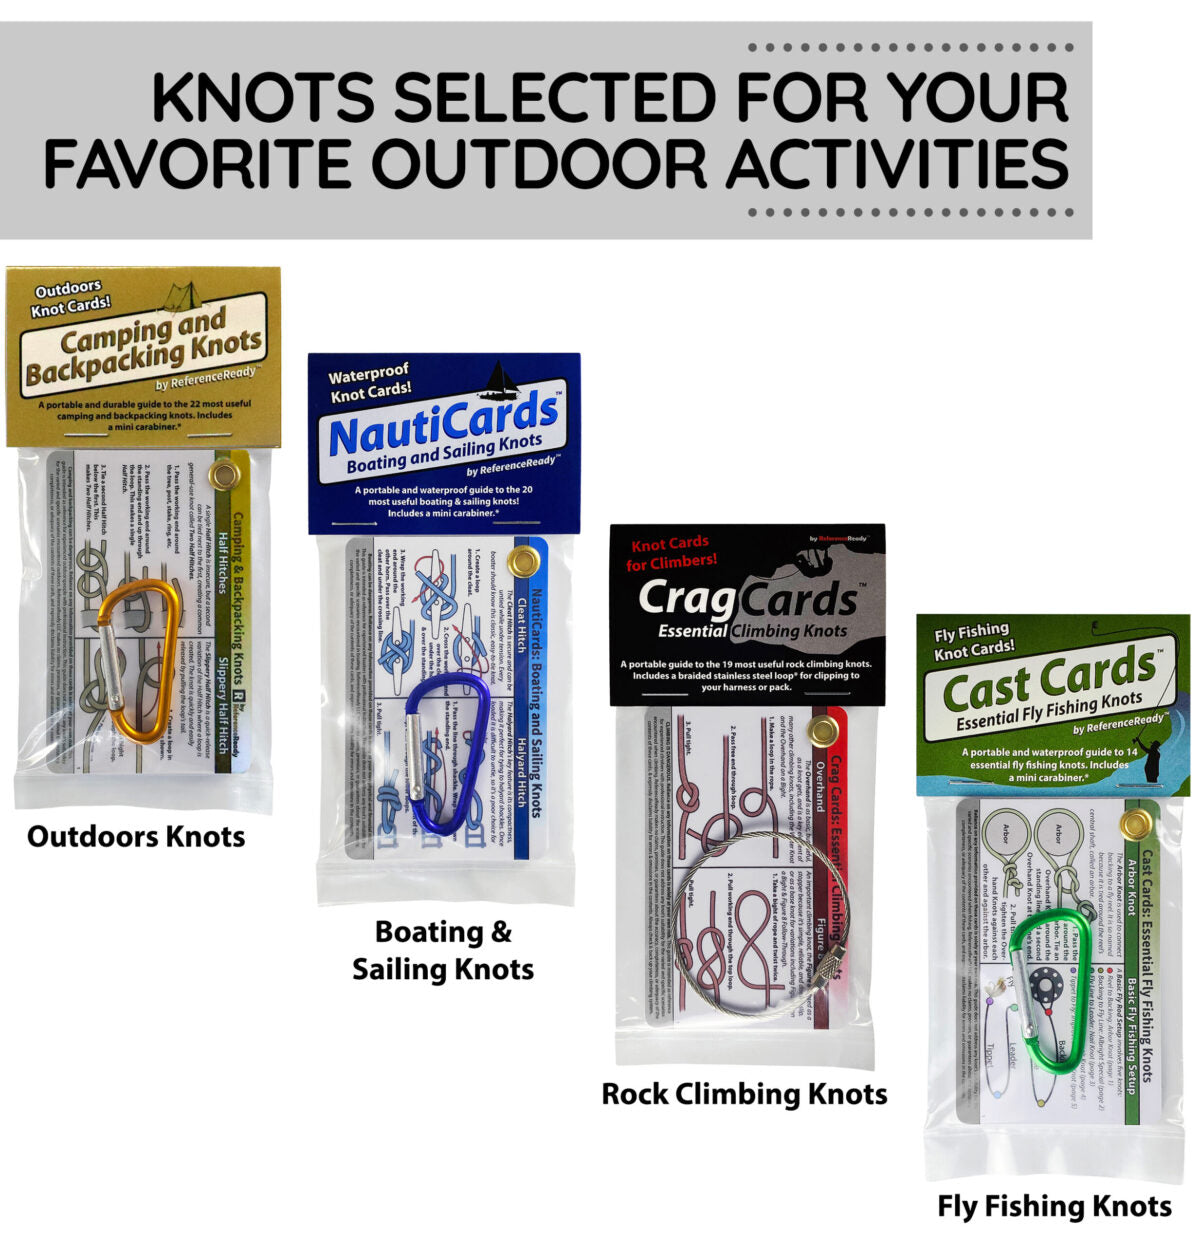 Fly Fishing Knot Cards - Waterproof Guide To 14 Essential Fly Fishing Knots  - Includes Mini Carabiner